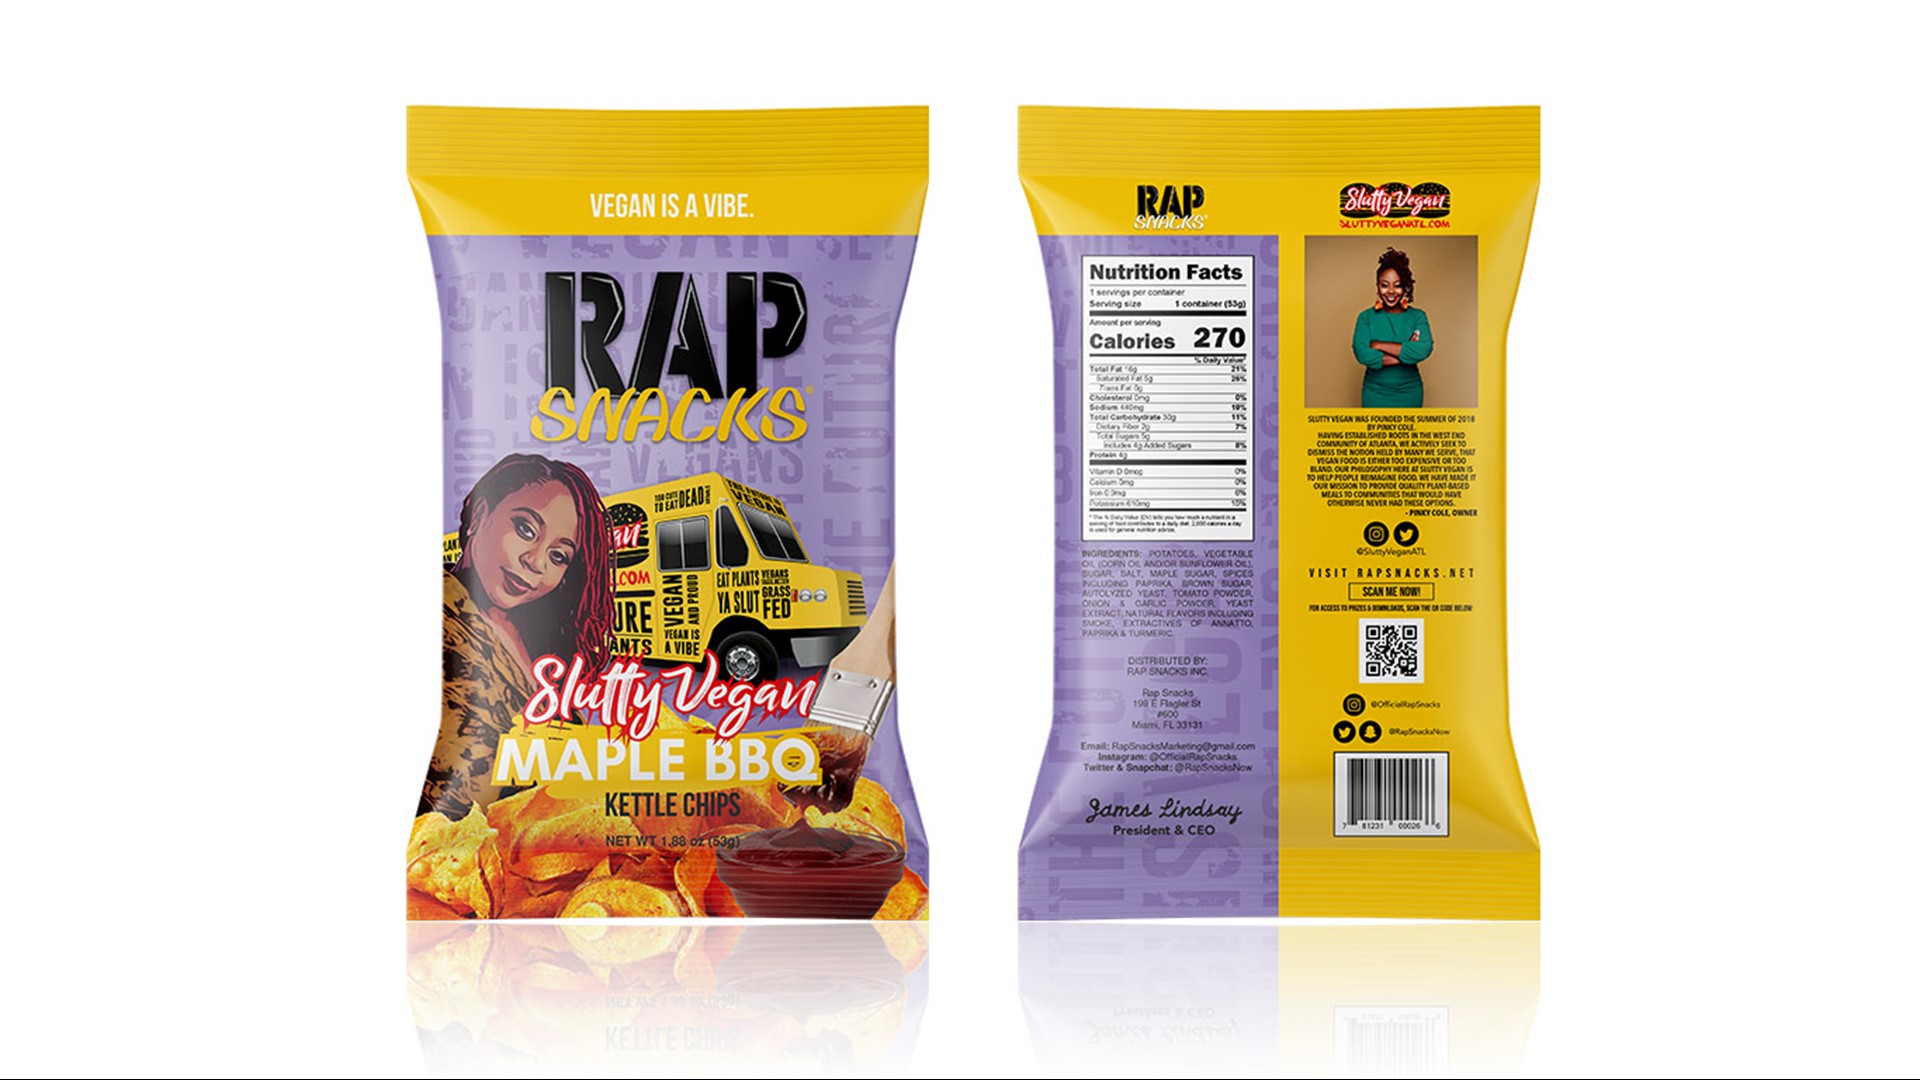 Aisha "Pinky" Coleman, the owner  Slutty Vegan ATL, is taking her career to new heights by creating the first plant-based potato chip with Rap Snacks.